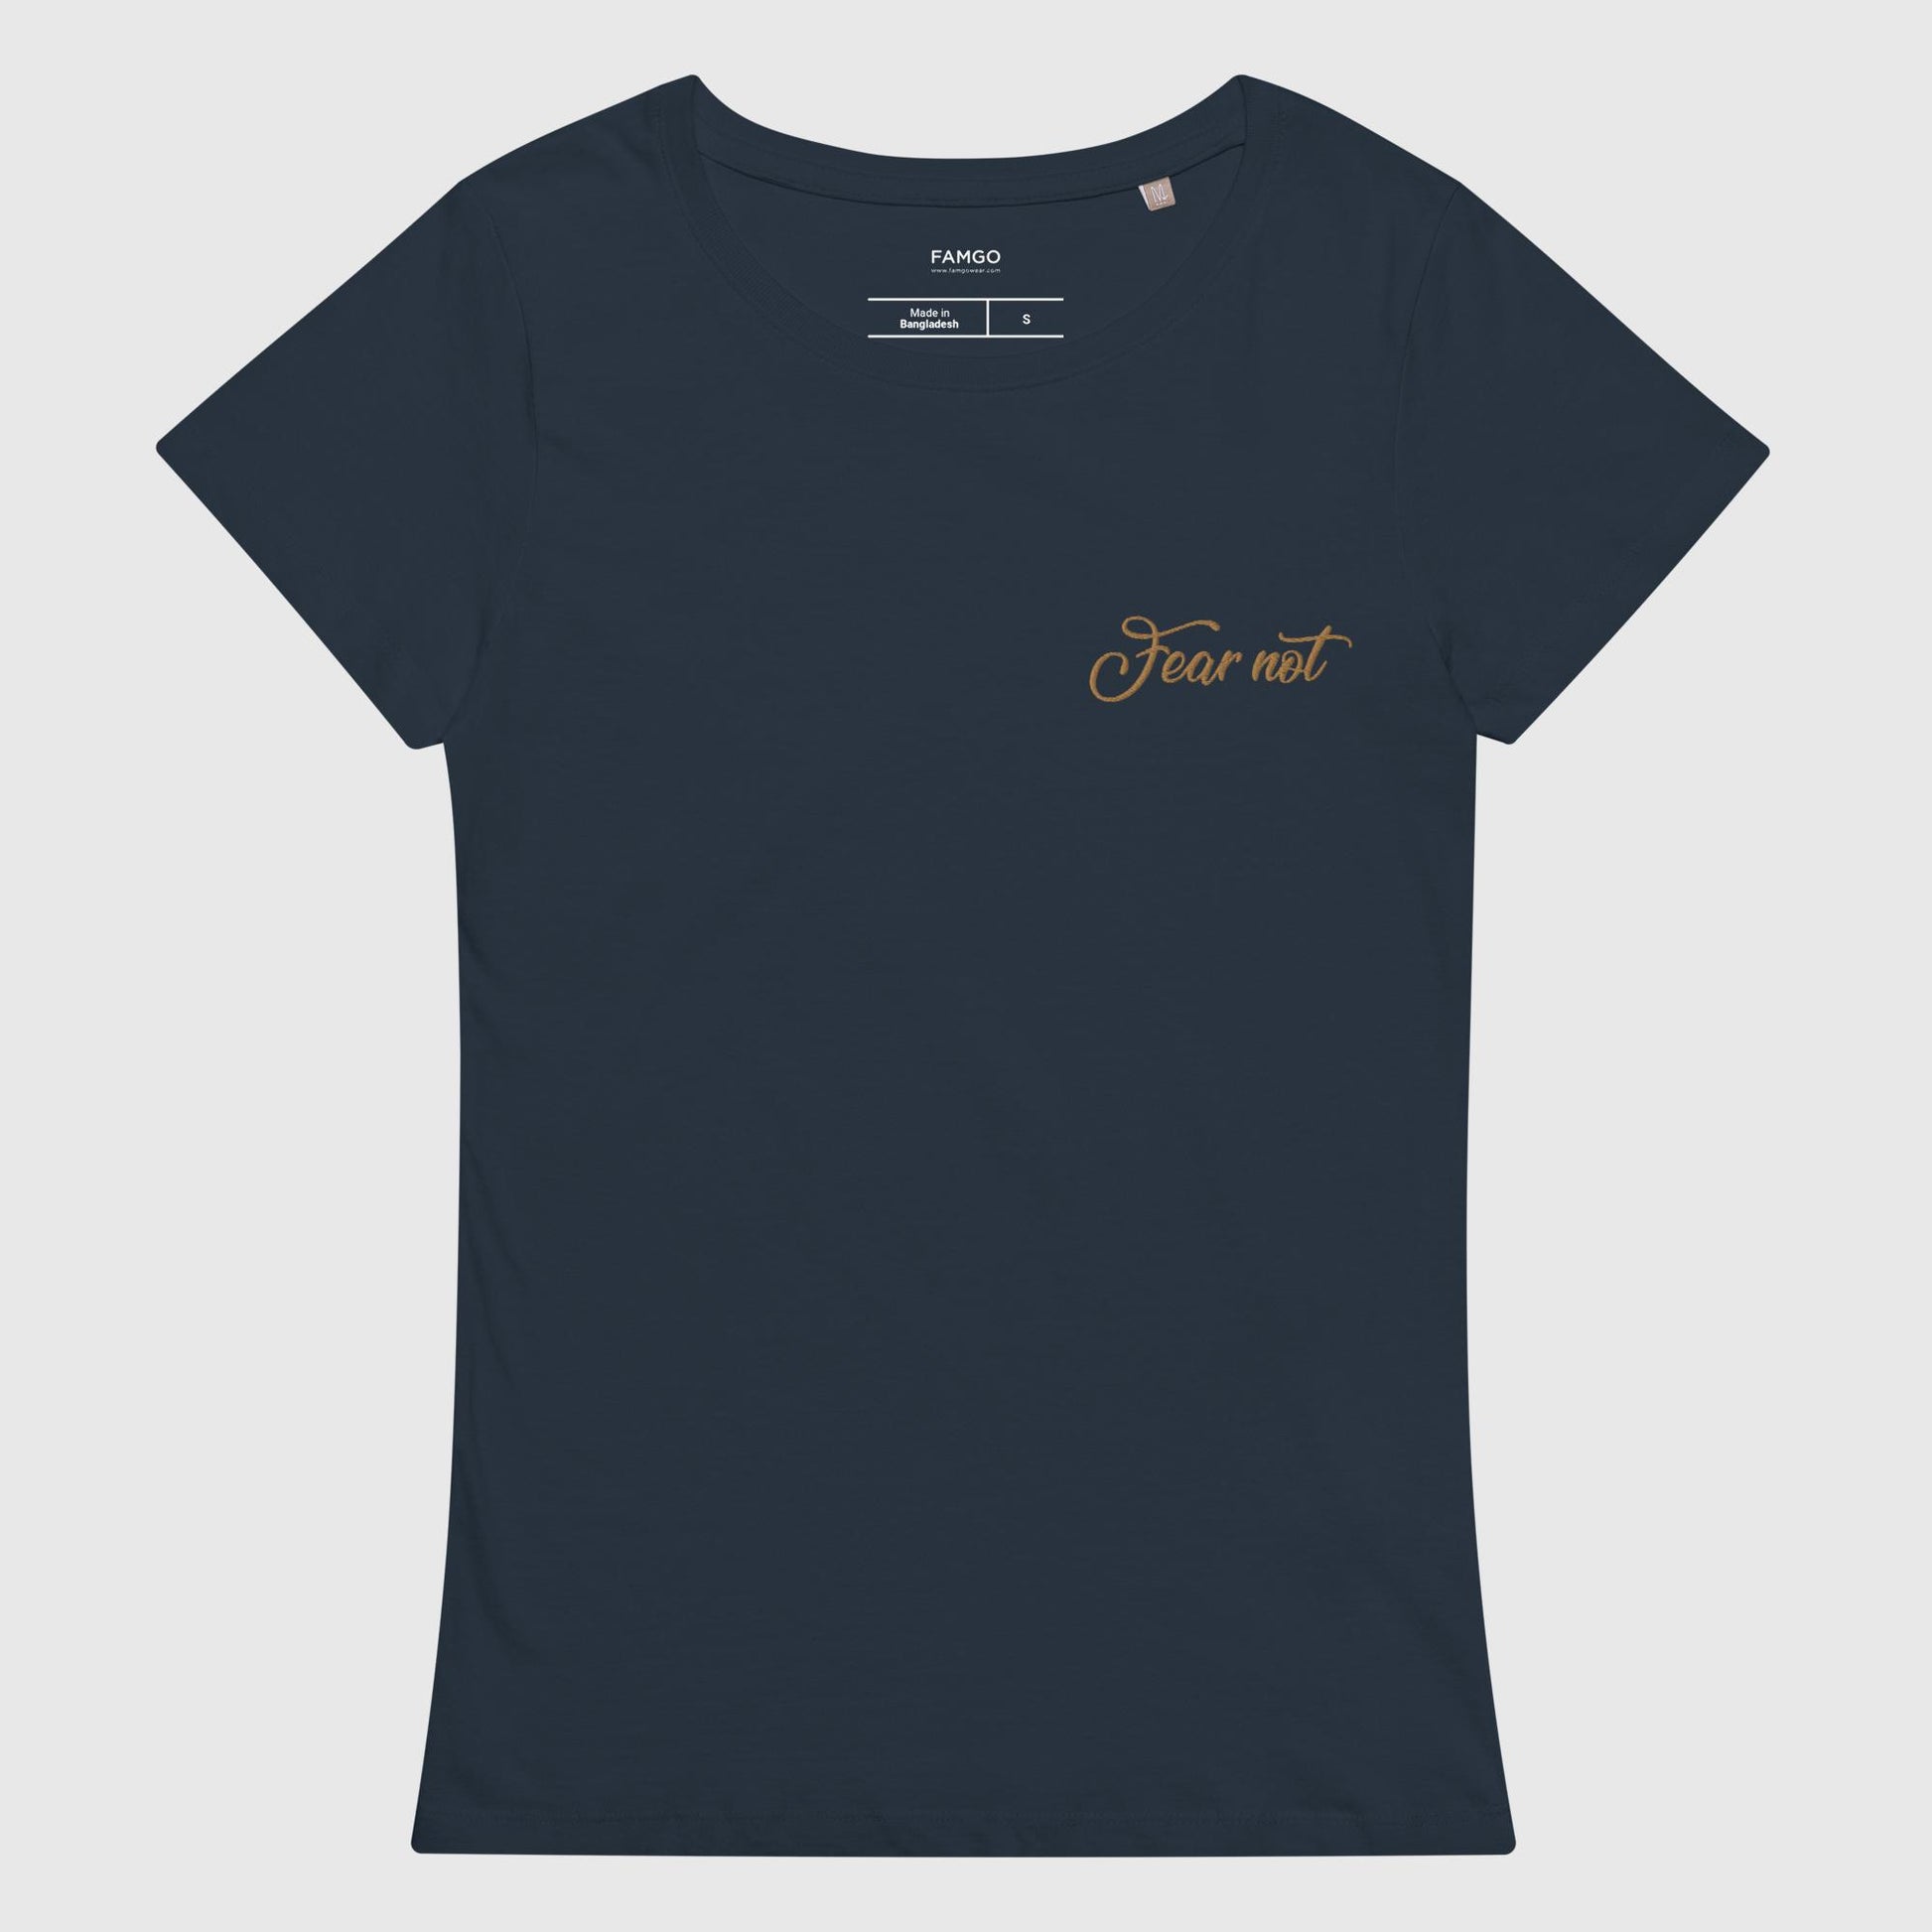 Women's french navy organic cotton t-shirt that features the inspirational quote, "Fear Not."